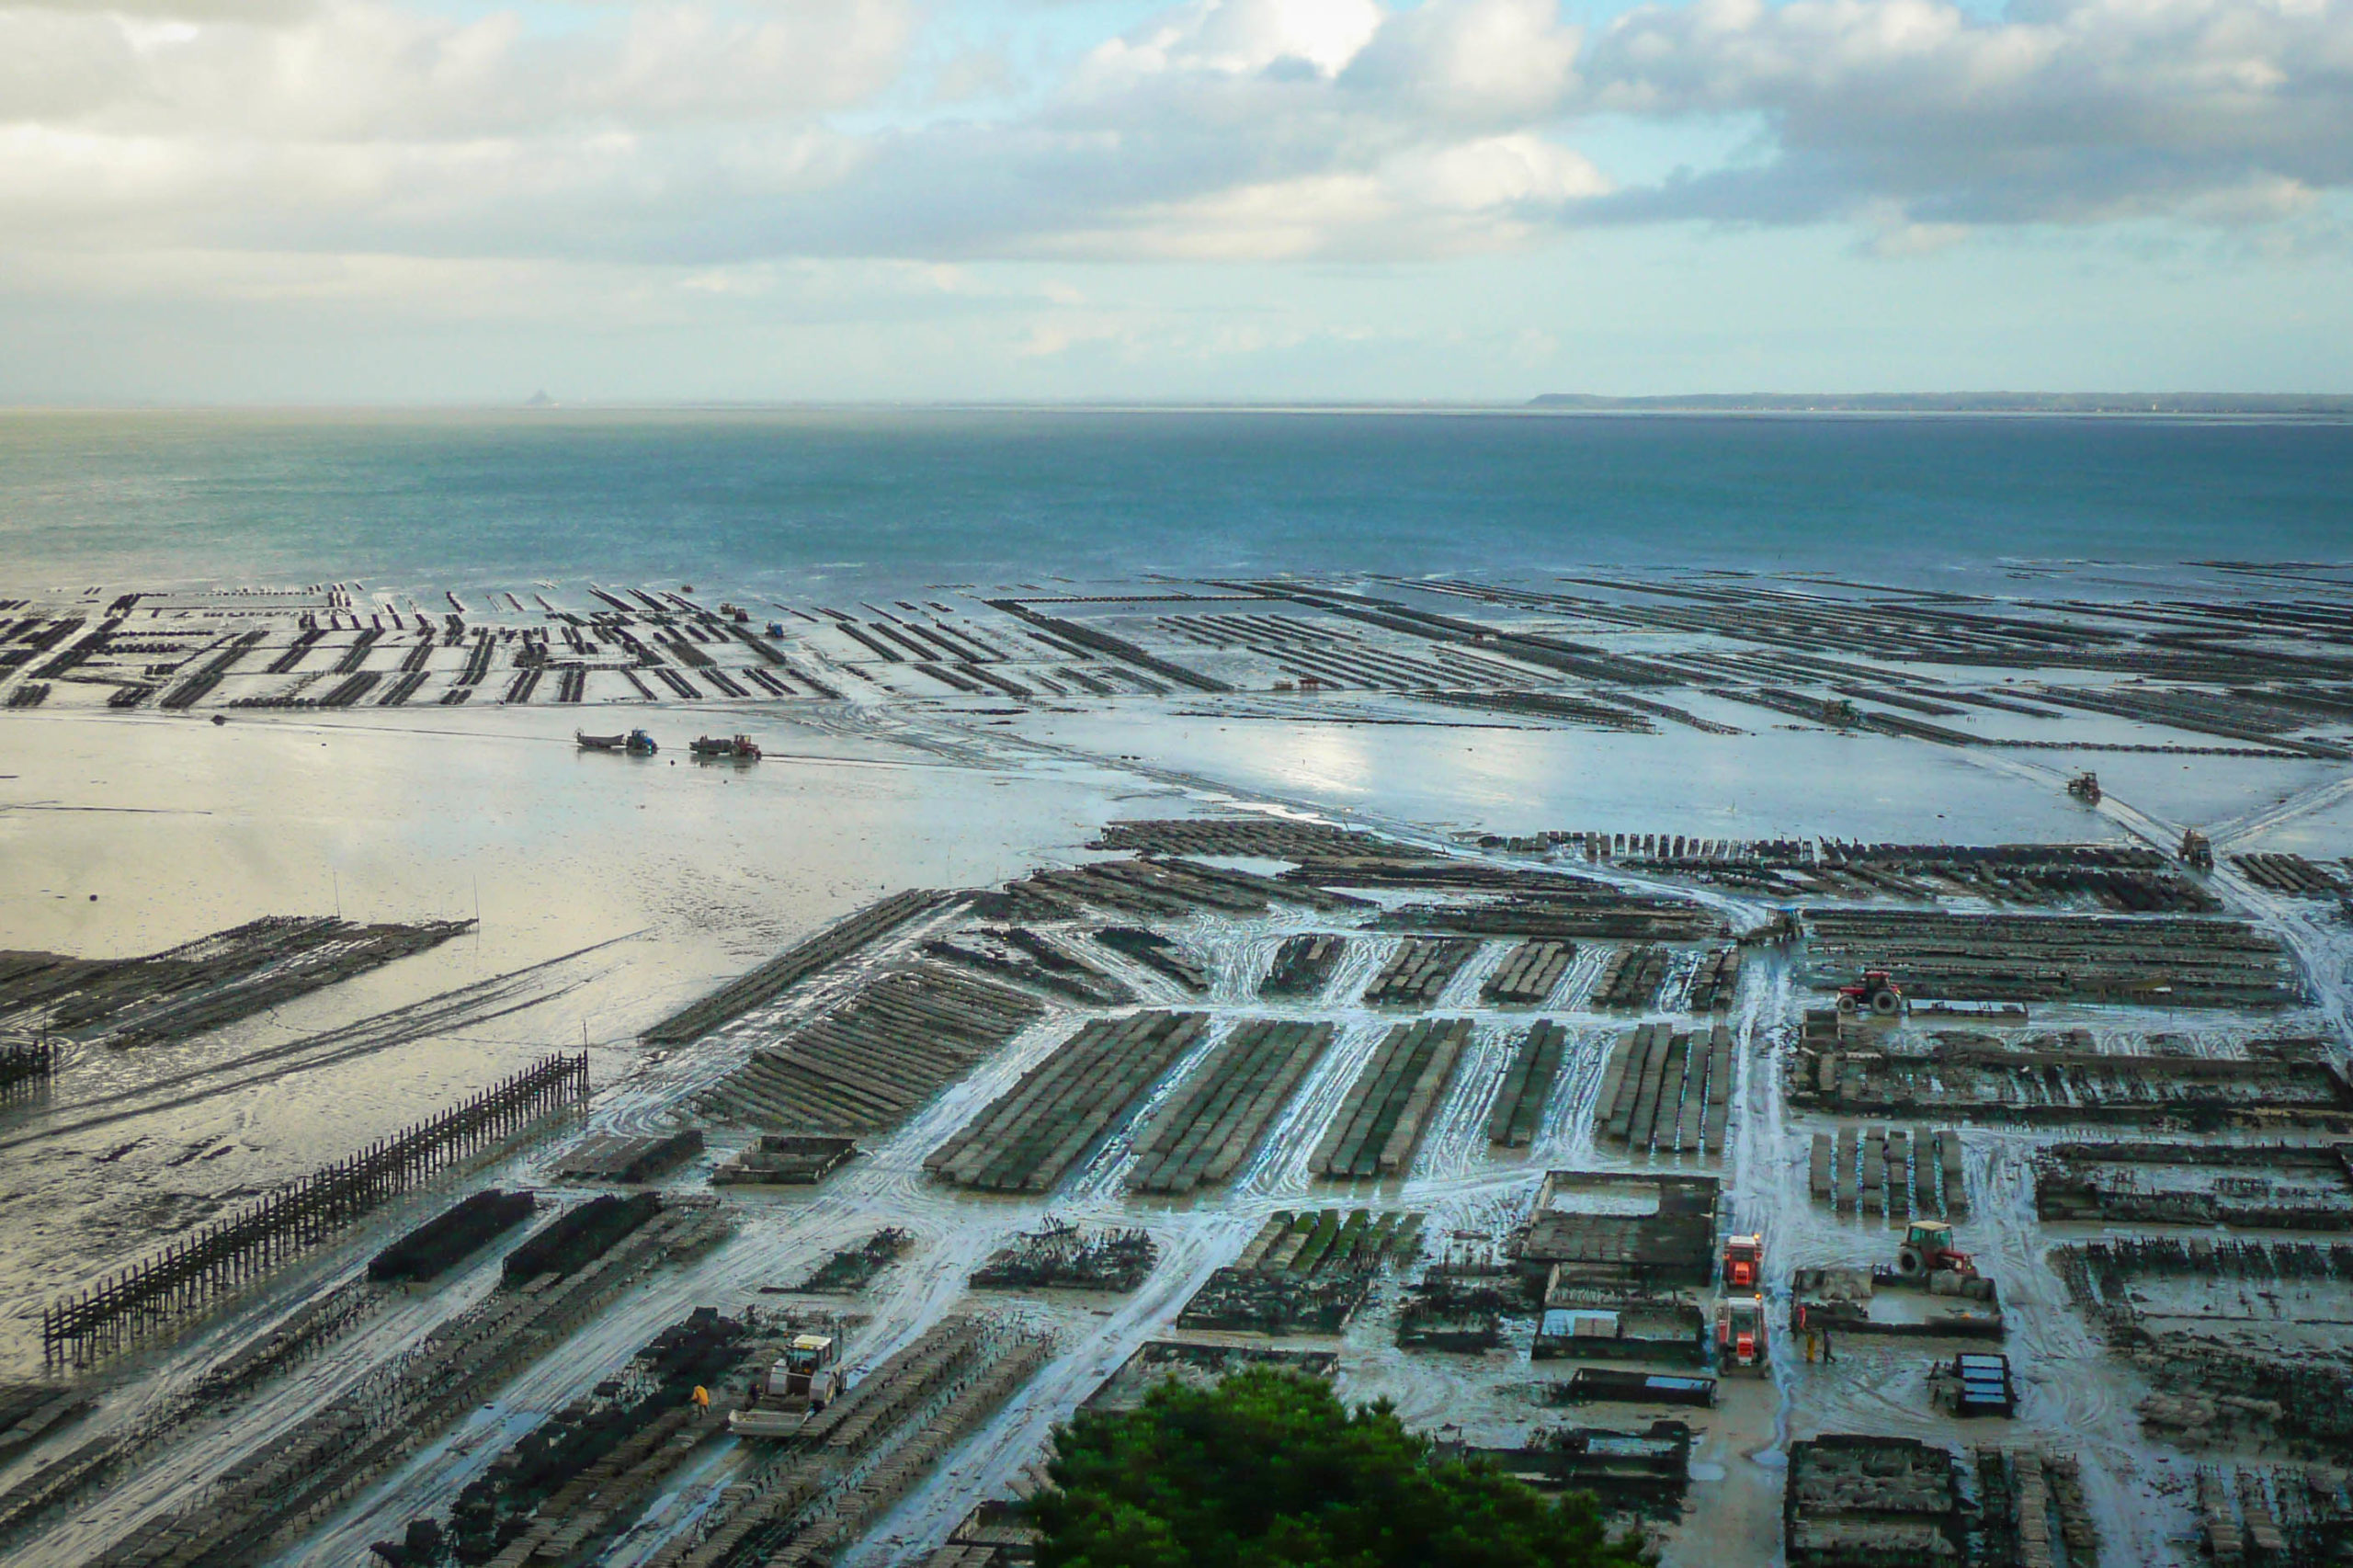 Cancale Oyster Fields © Héric SAMSON - licence [CC BY-SA 3.0] from Wikimedia Commons